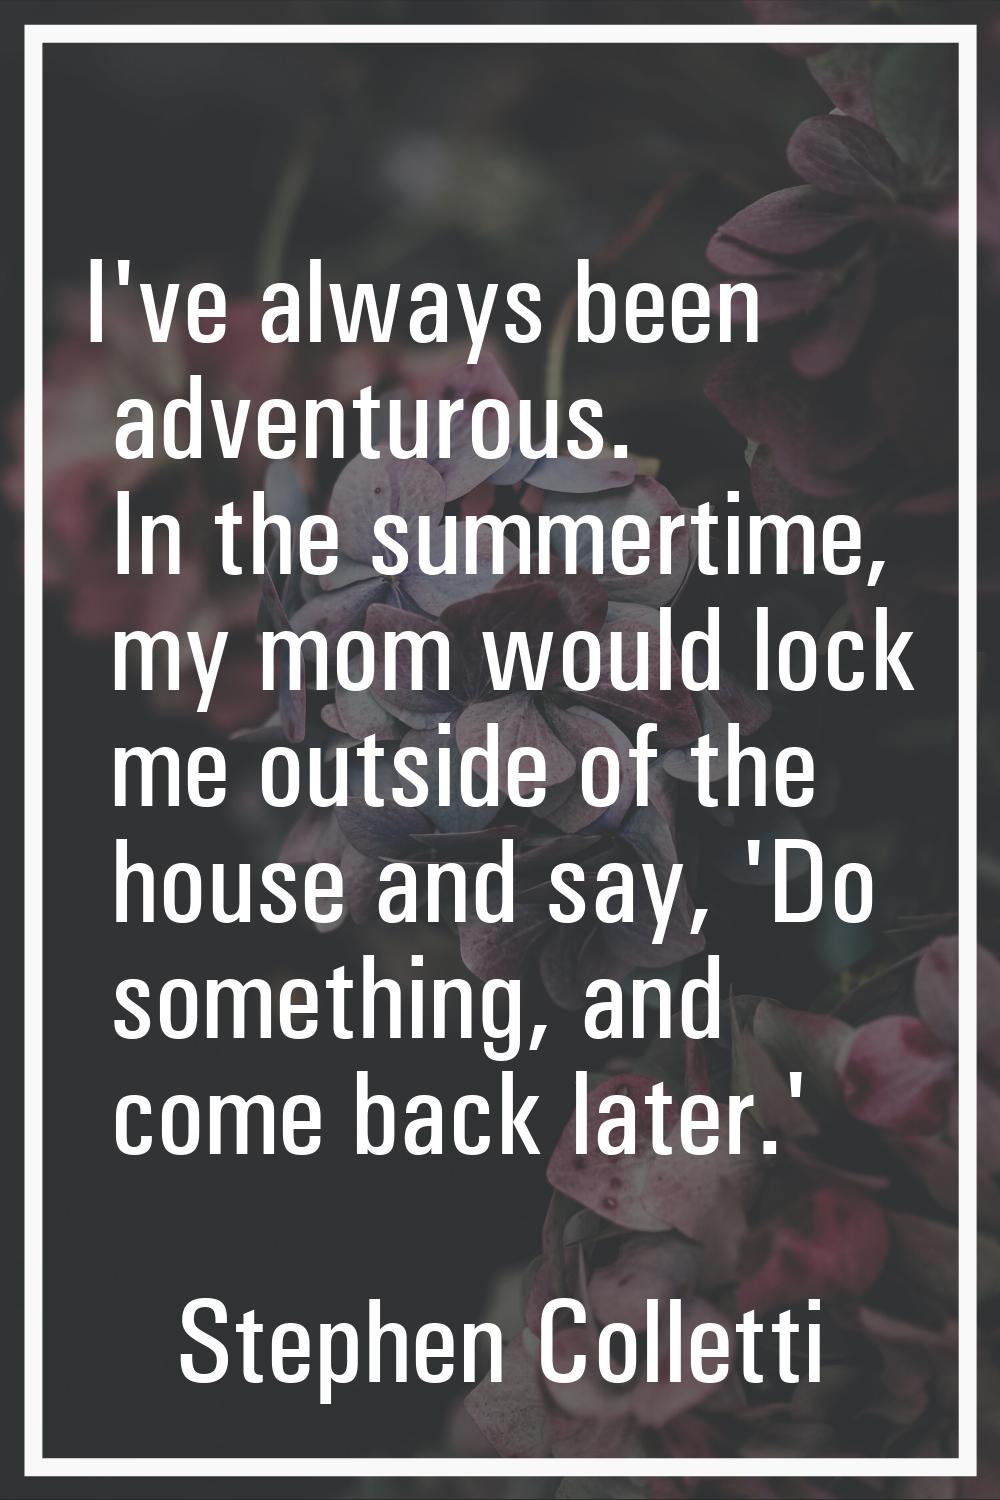 I've always been adventurous. In the summertime, my mom would lock me outside of the house and say,